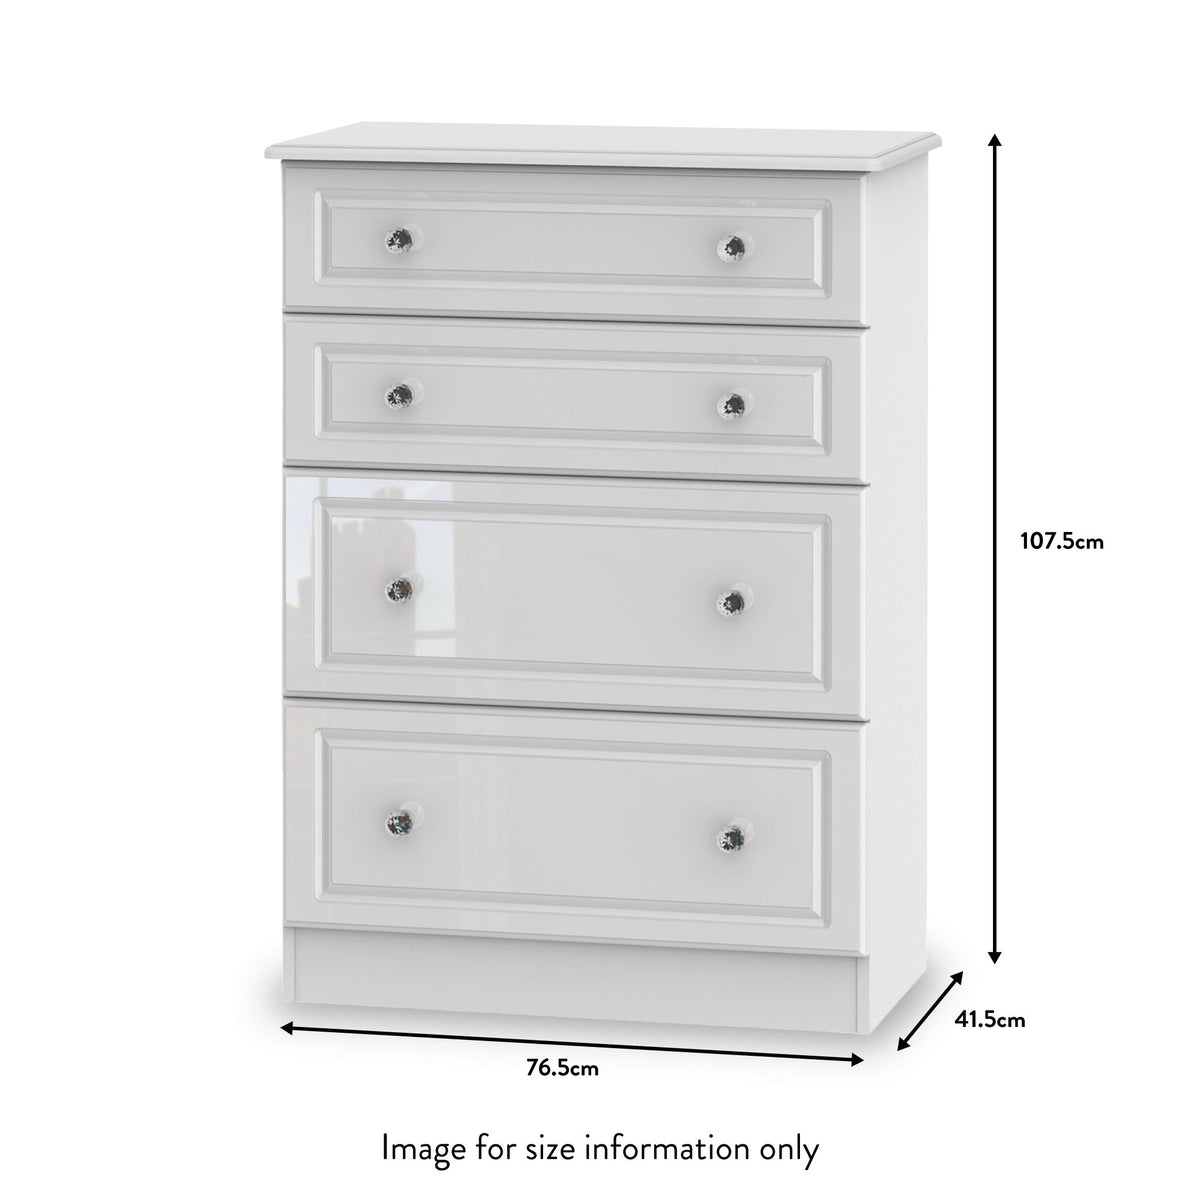 Kinsley White Gloss 4 Drawer Deep Chest size